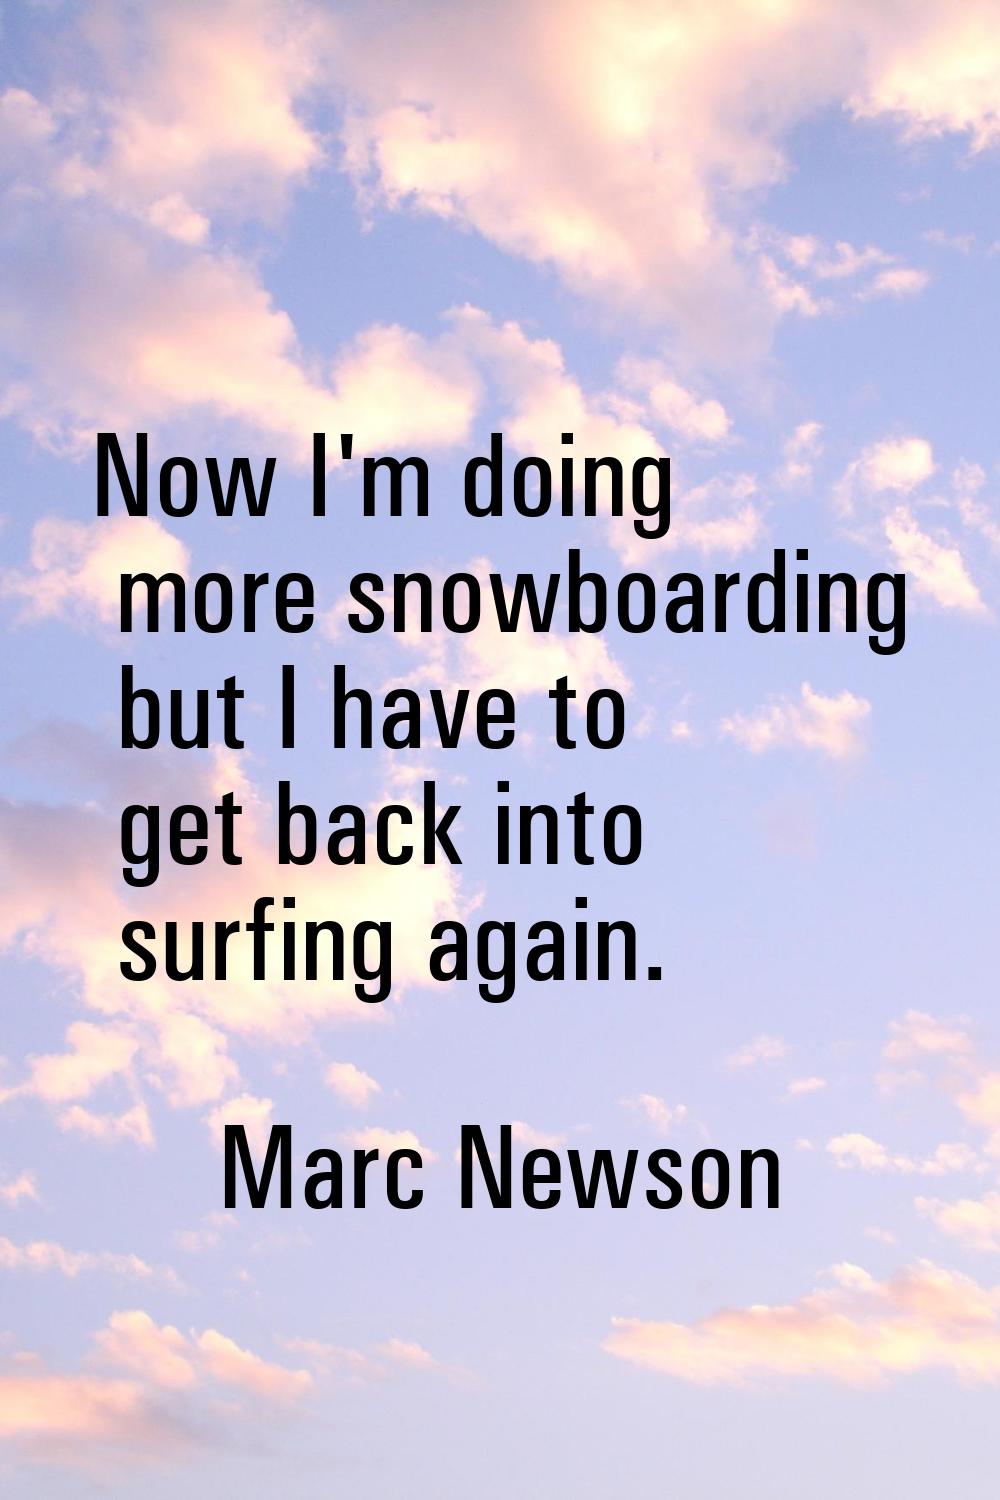 Now I'm doing more snowboarding but I have to get back into surfing again.